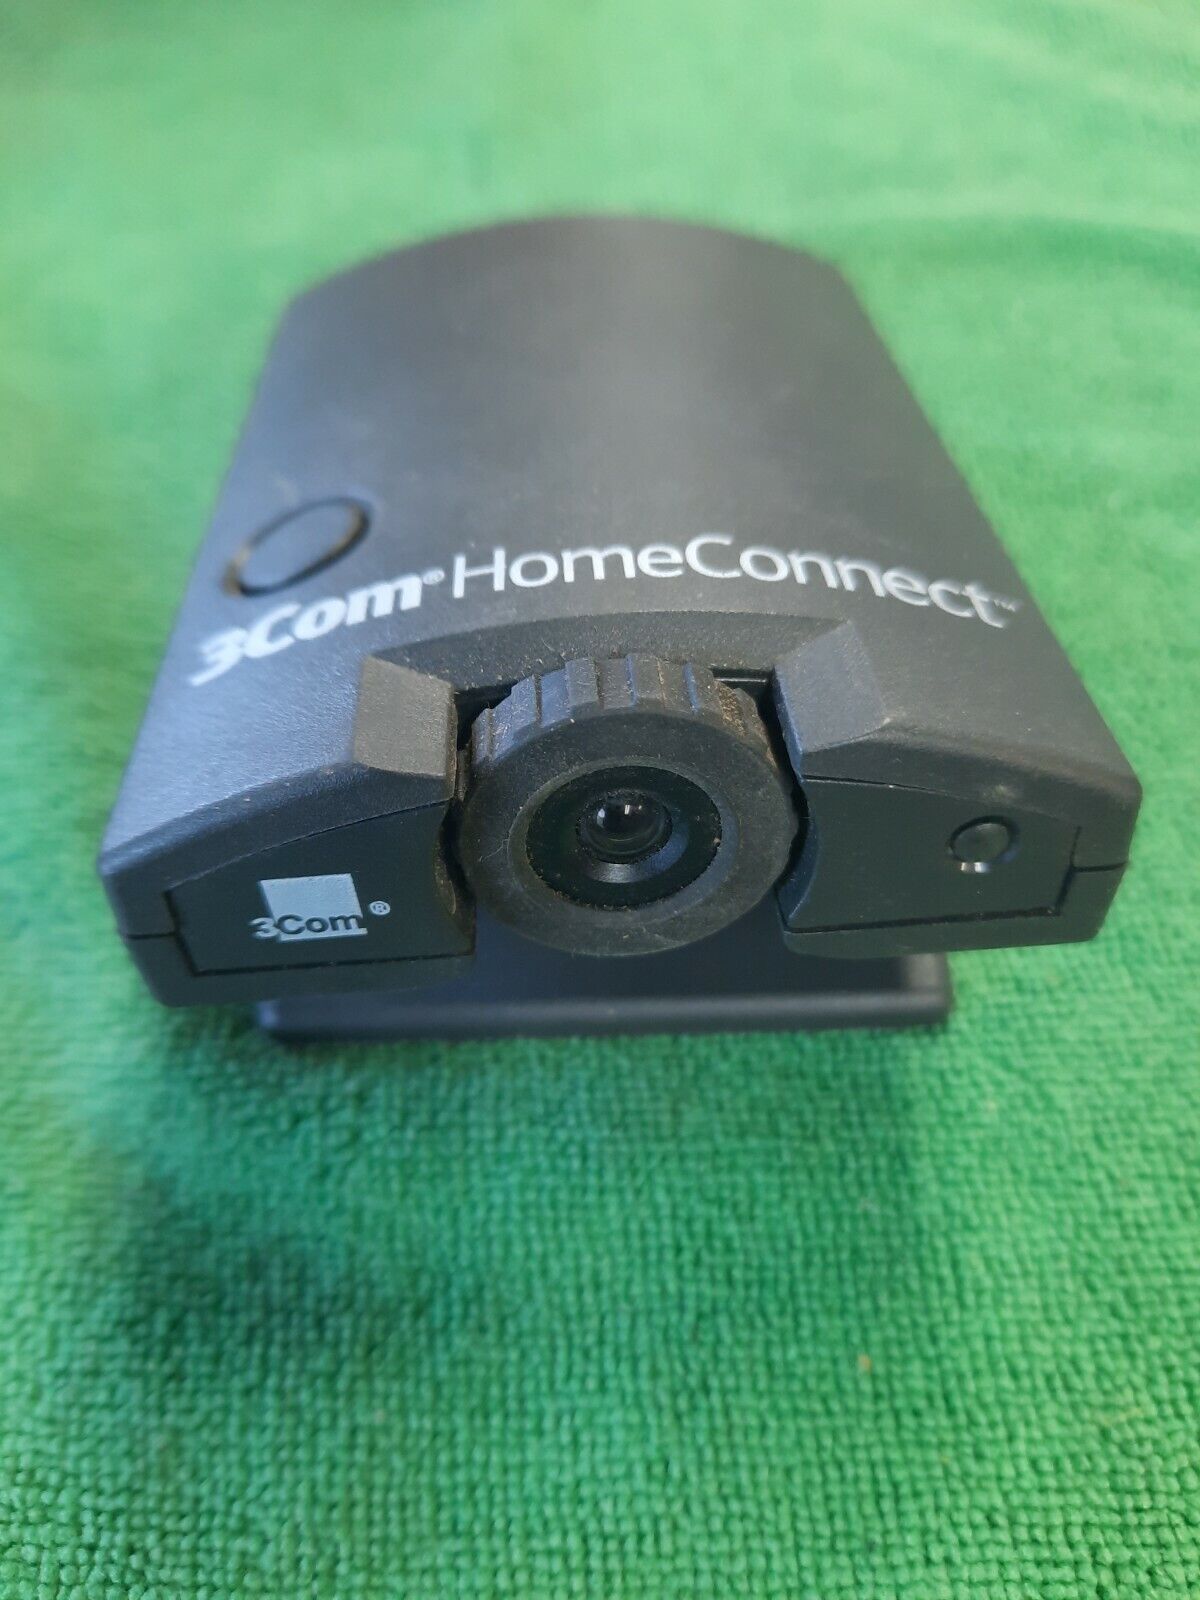 PC Digital Camera  3Com HomeConnect Only For Old OS No Cables Vtg 1980s  Vg